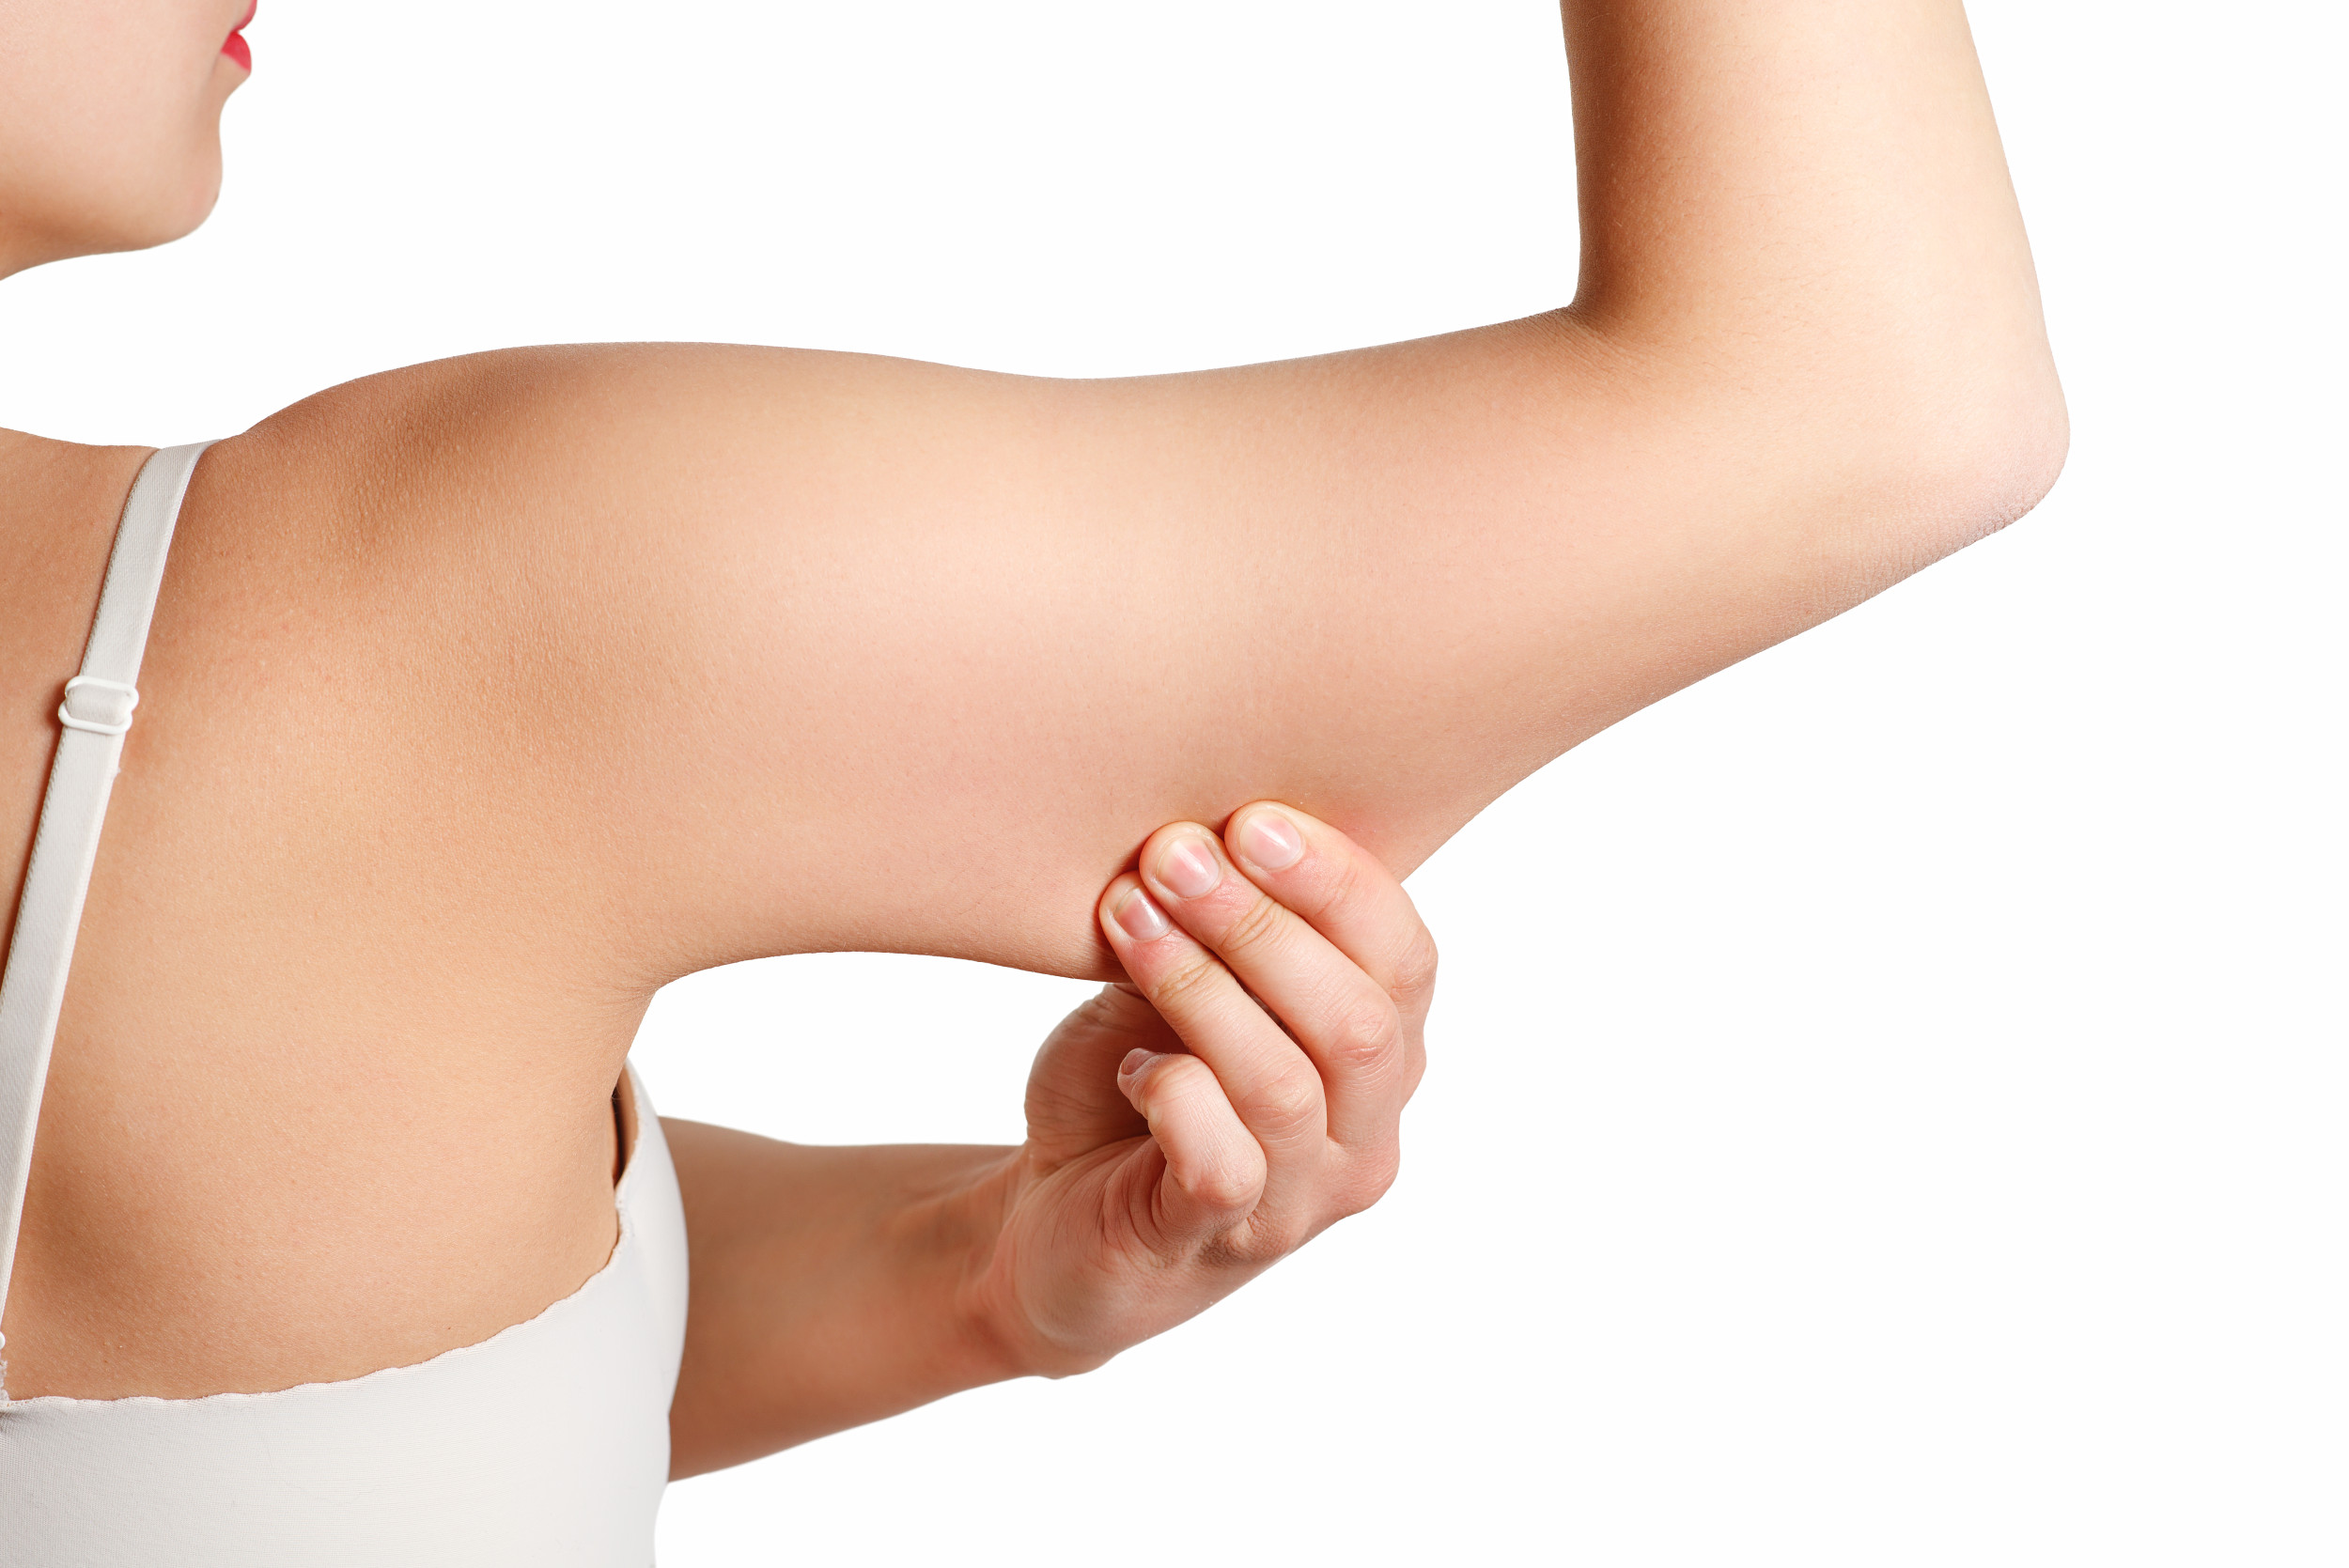 The Top Three Exercises To Reduce Upper Arm Fat, According to a